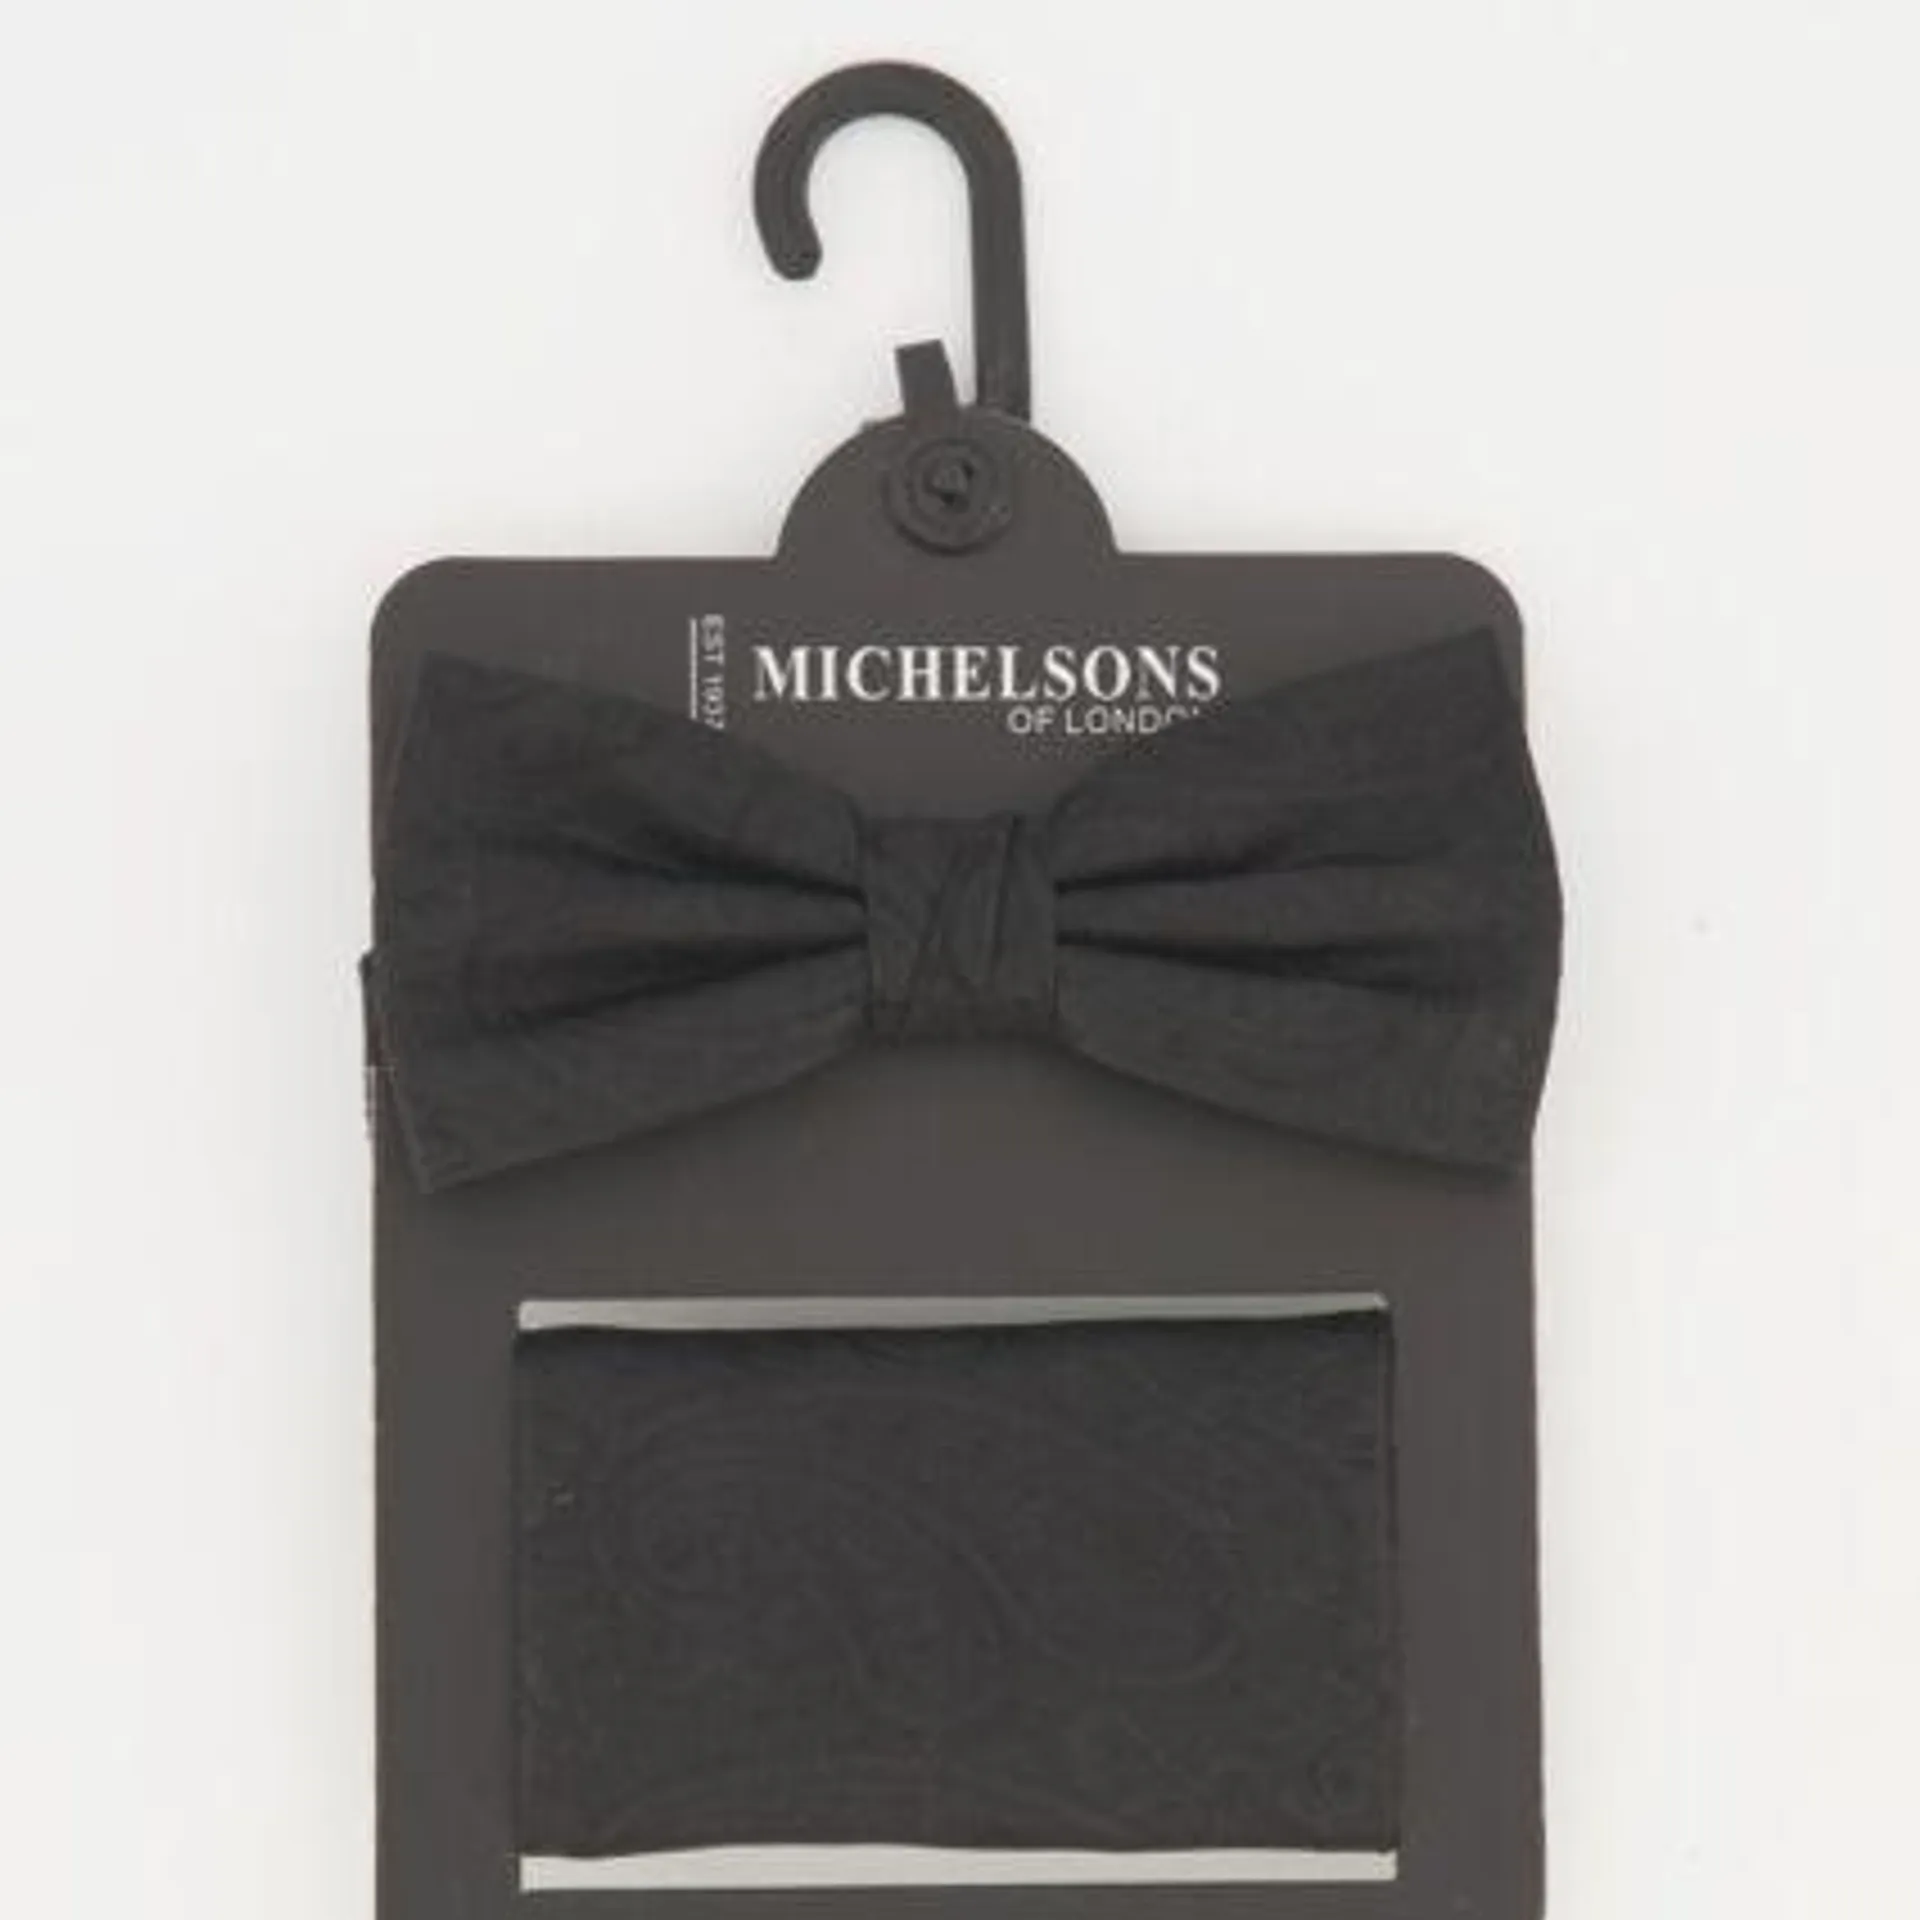 Michelsons of London